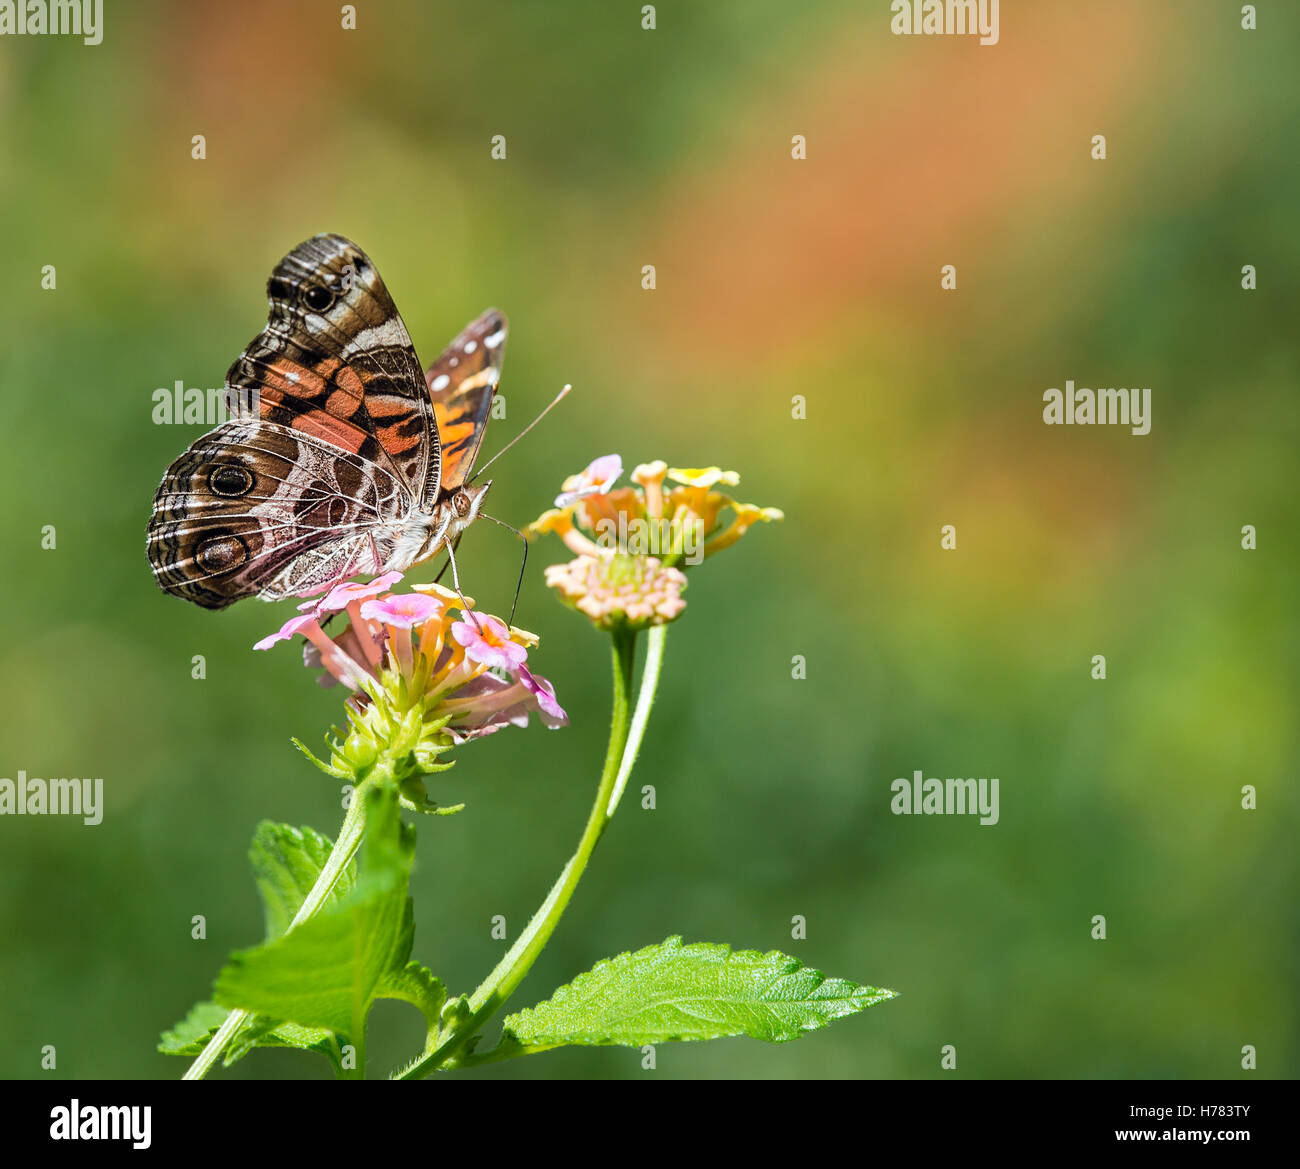 The American Painted Lady or American Lady (Vanessa virginiensis) butterfly feeding on Lantana flowers Stock Photo